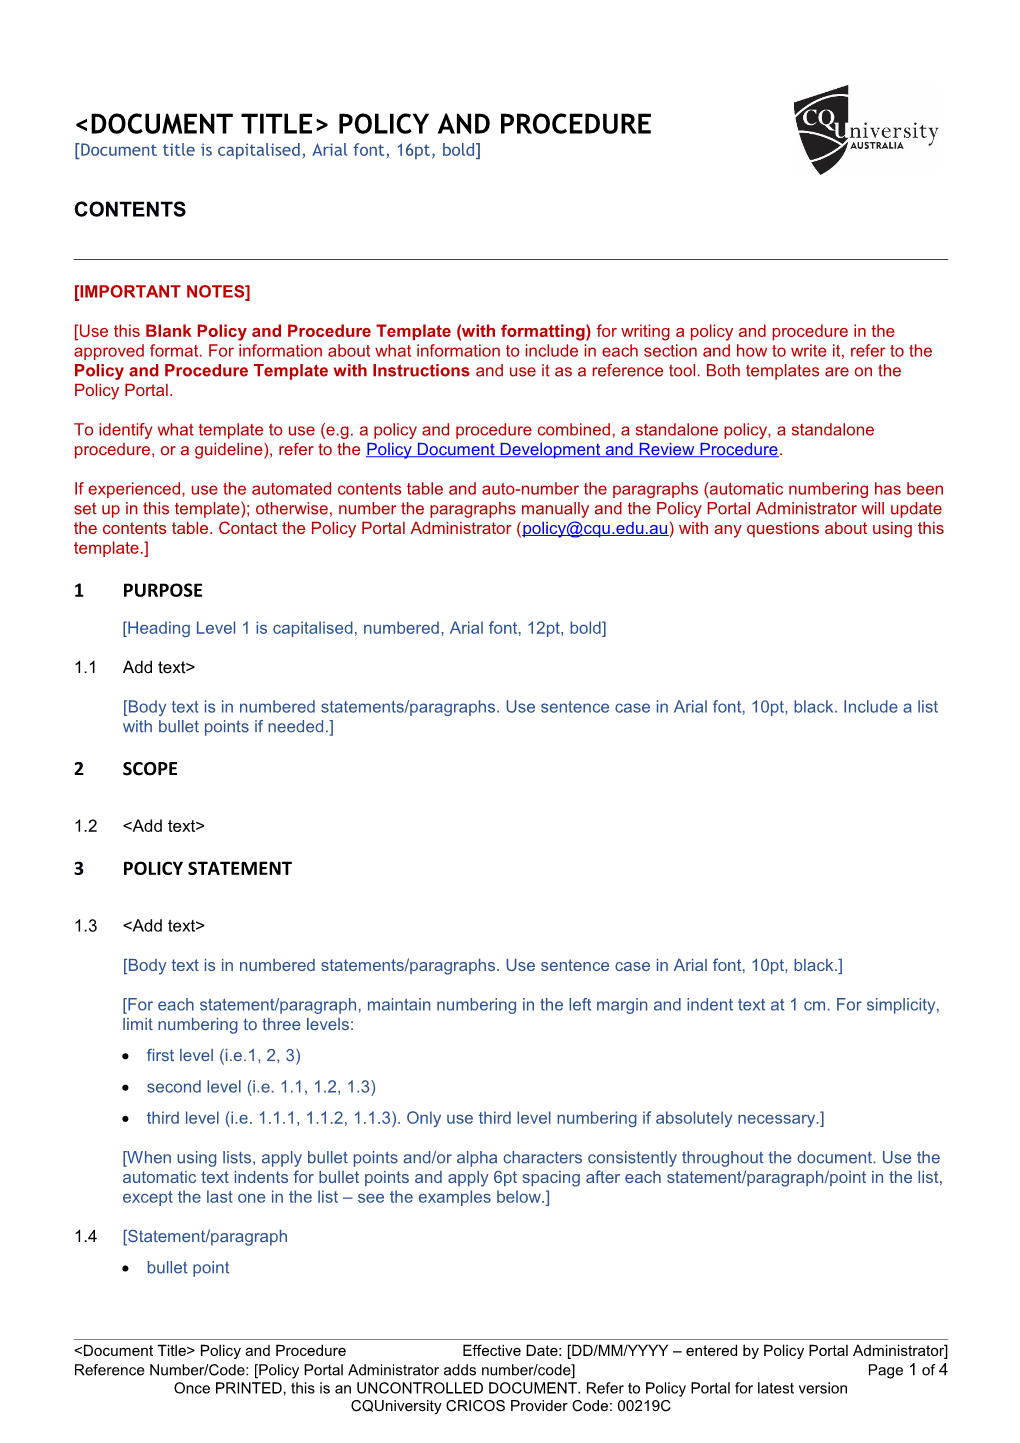 Policy and Procedure Template - Blank